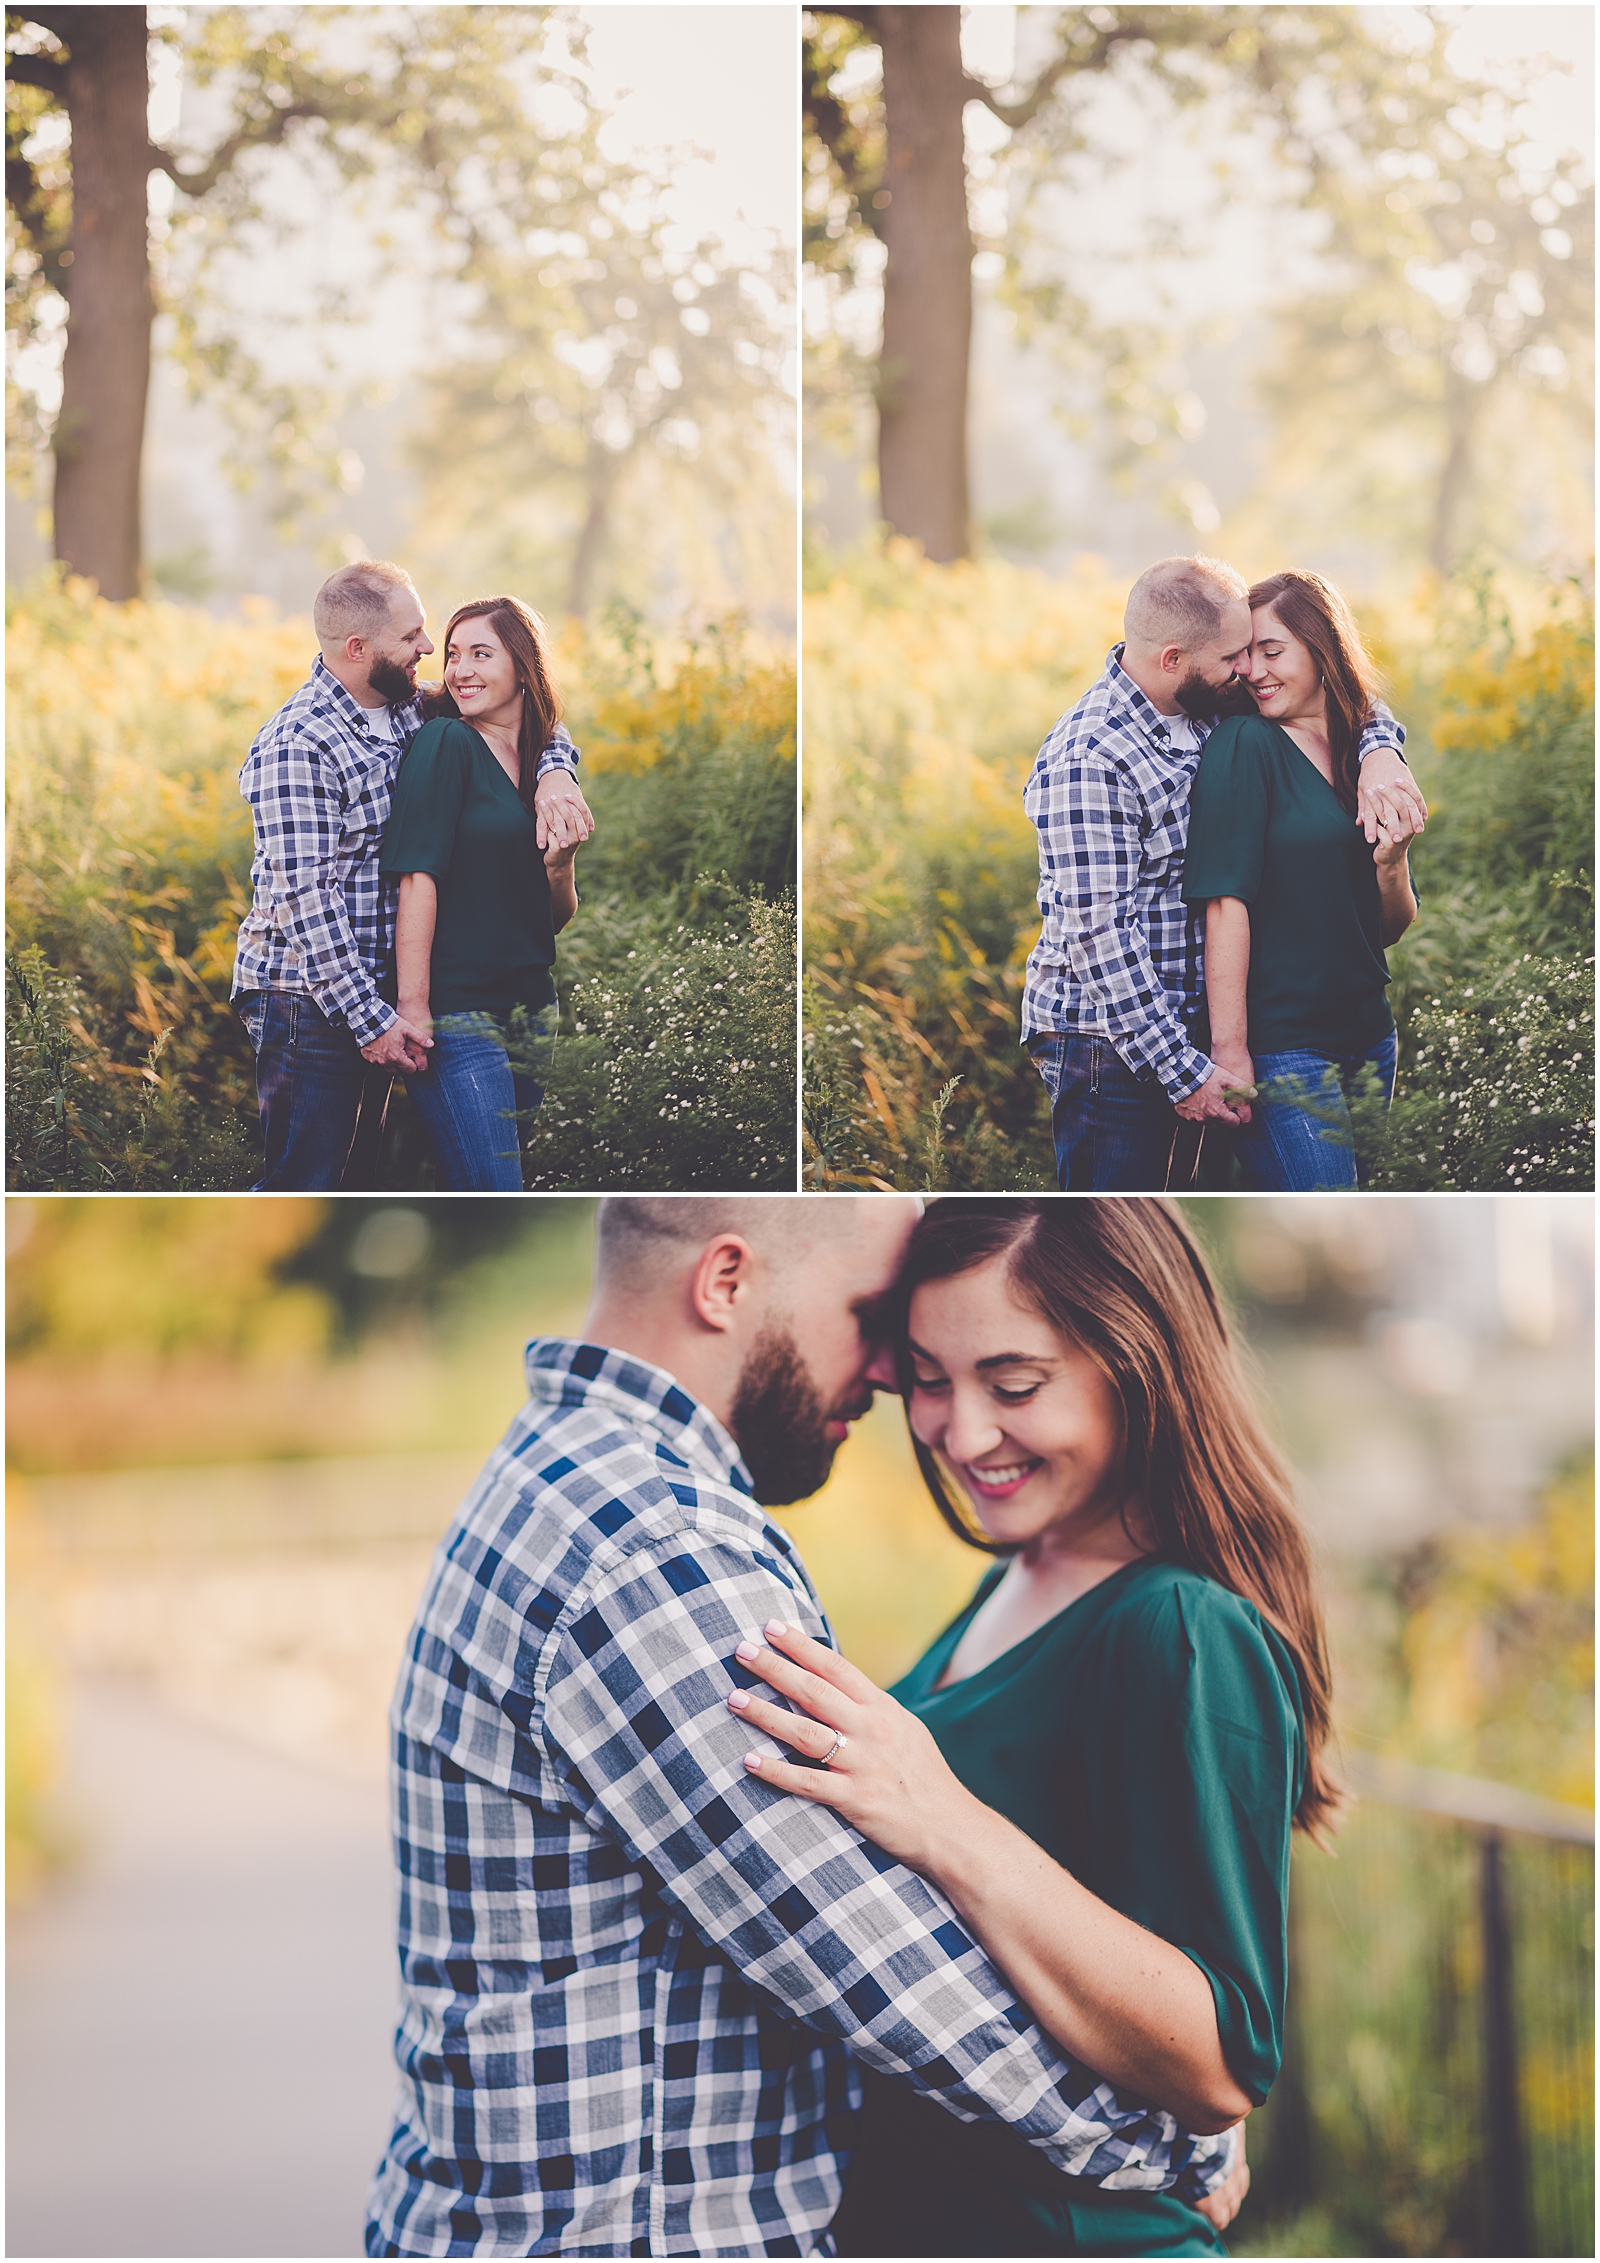 Colleen and Joel's Lincoln Park Nature Boardwalk engagement session in Chicago, Illinois with Chicagoland wedding photographer Kara Evans Photographer.